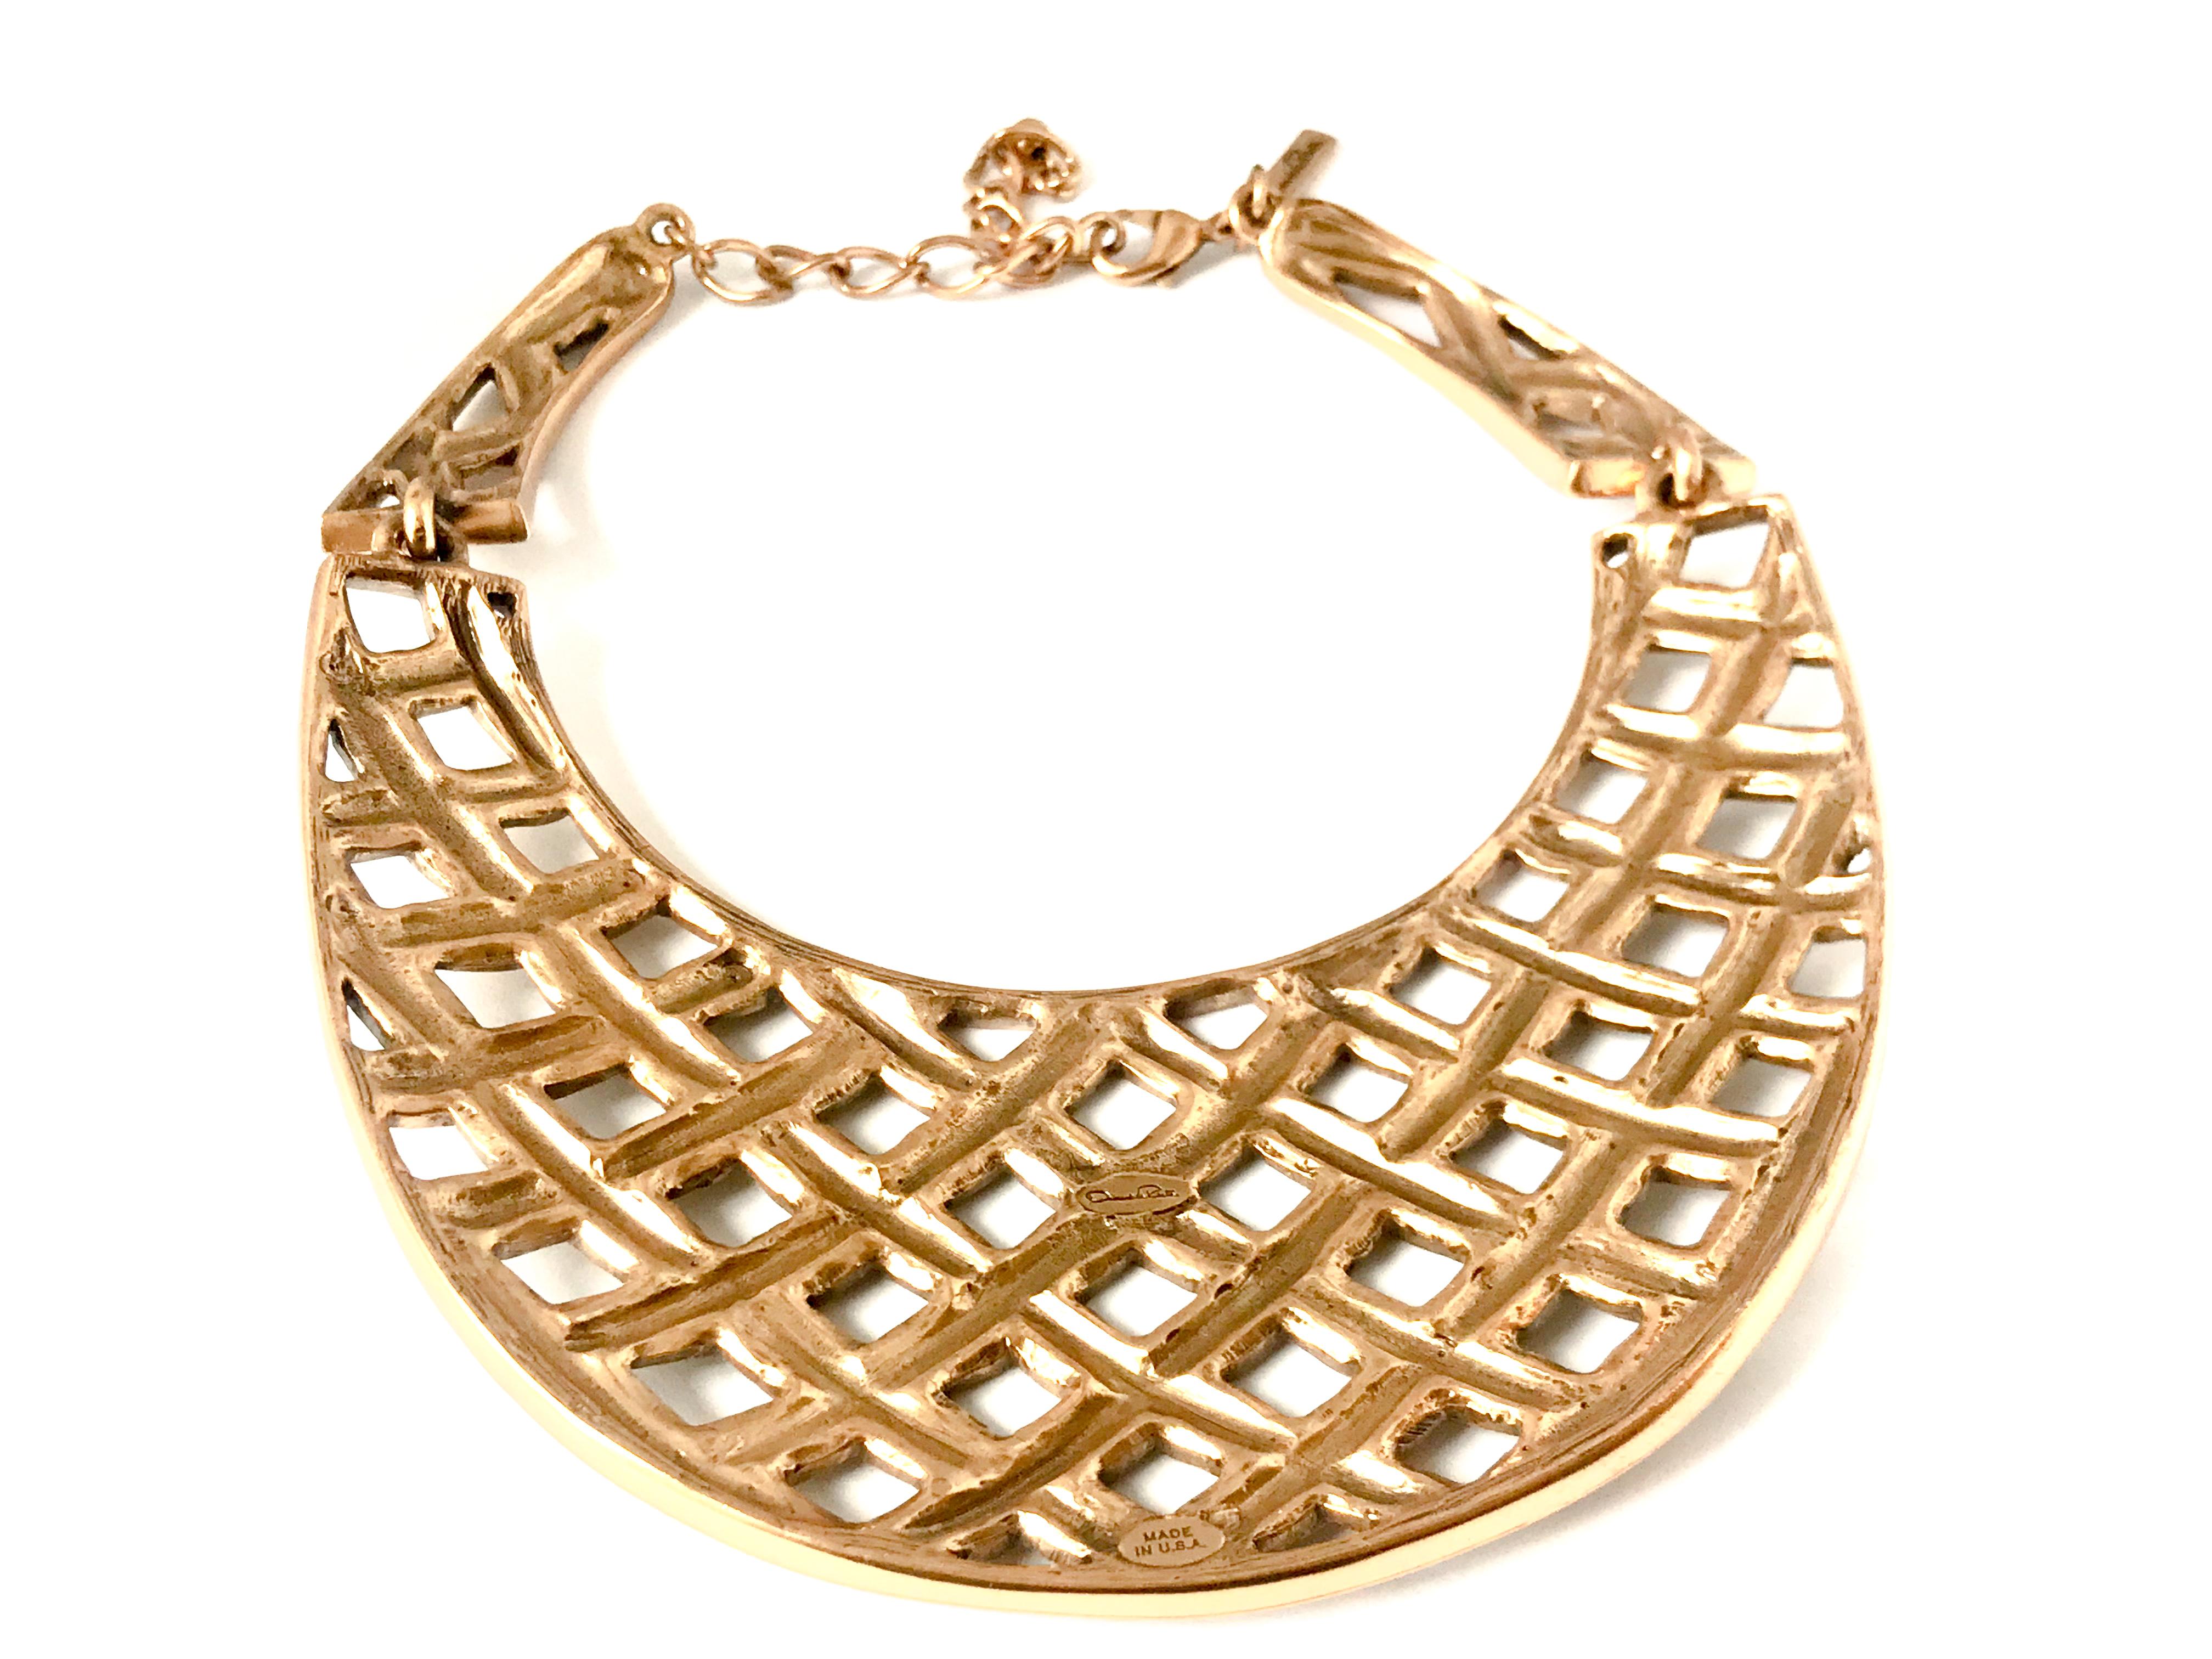 New Oscar de la Renta Vintage Bib Collar Necklace.  Made of golden pewter and brass metal showcasing an intricate, geometric basketweave collar design.

excellent unworn condition

Fabulous quality, built in the USA to last a lifetime. rrp - 660